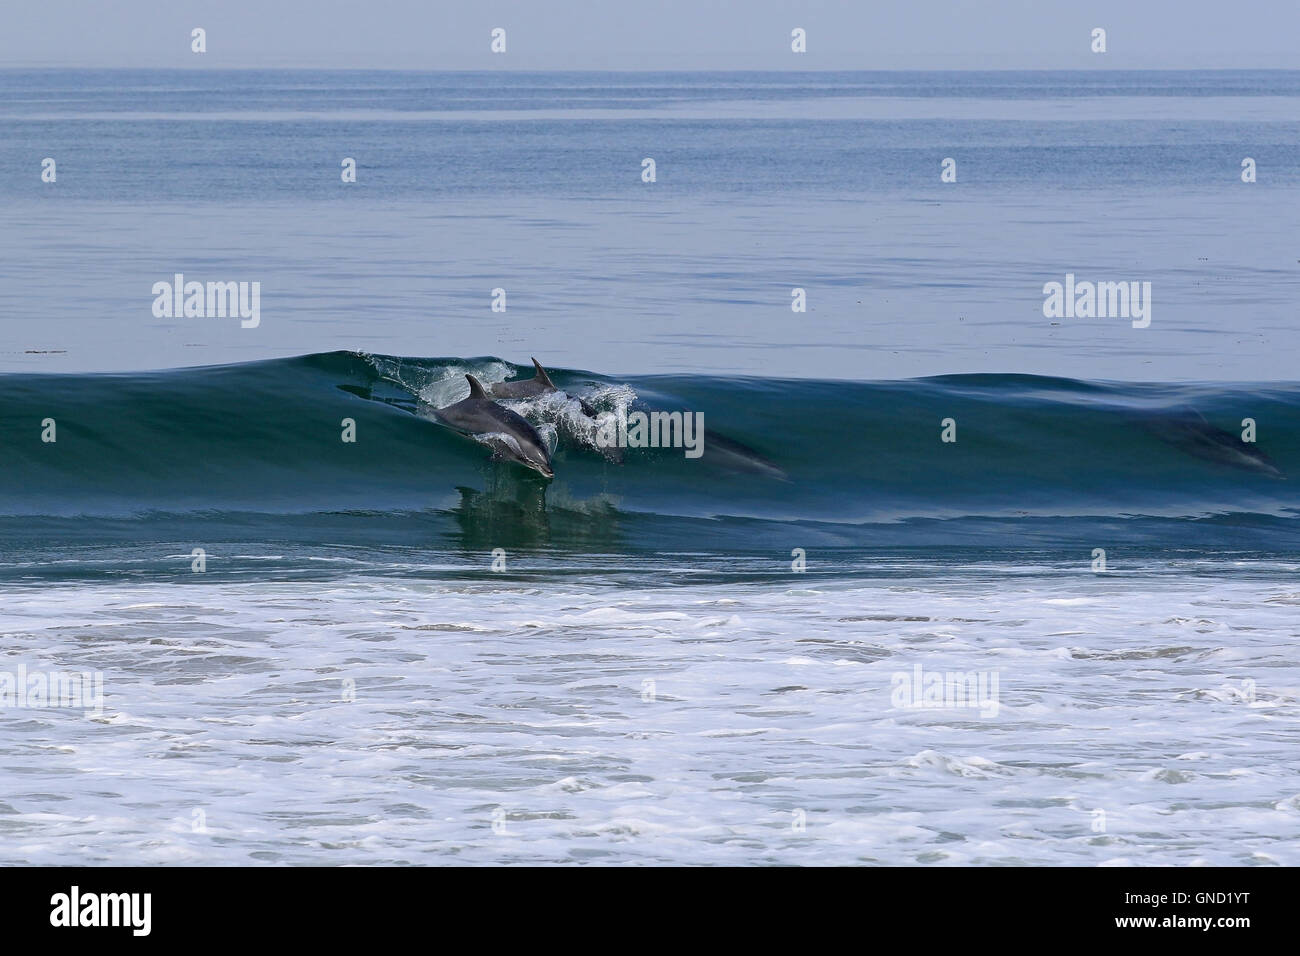 Dolphin group at the beach surfing waves along California coast Stock Photo